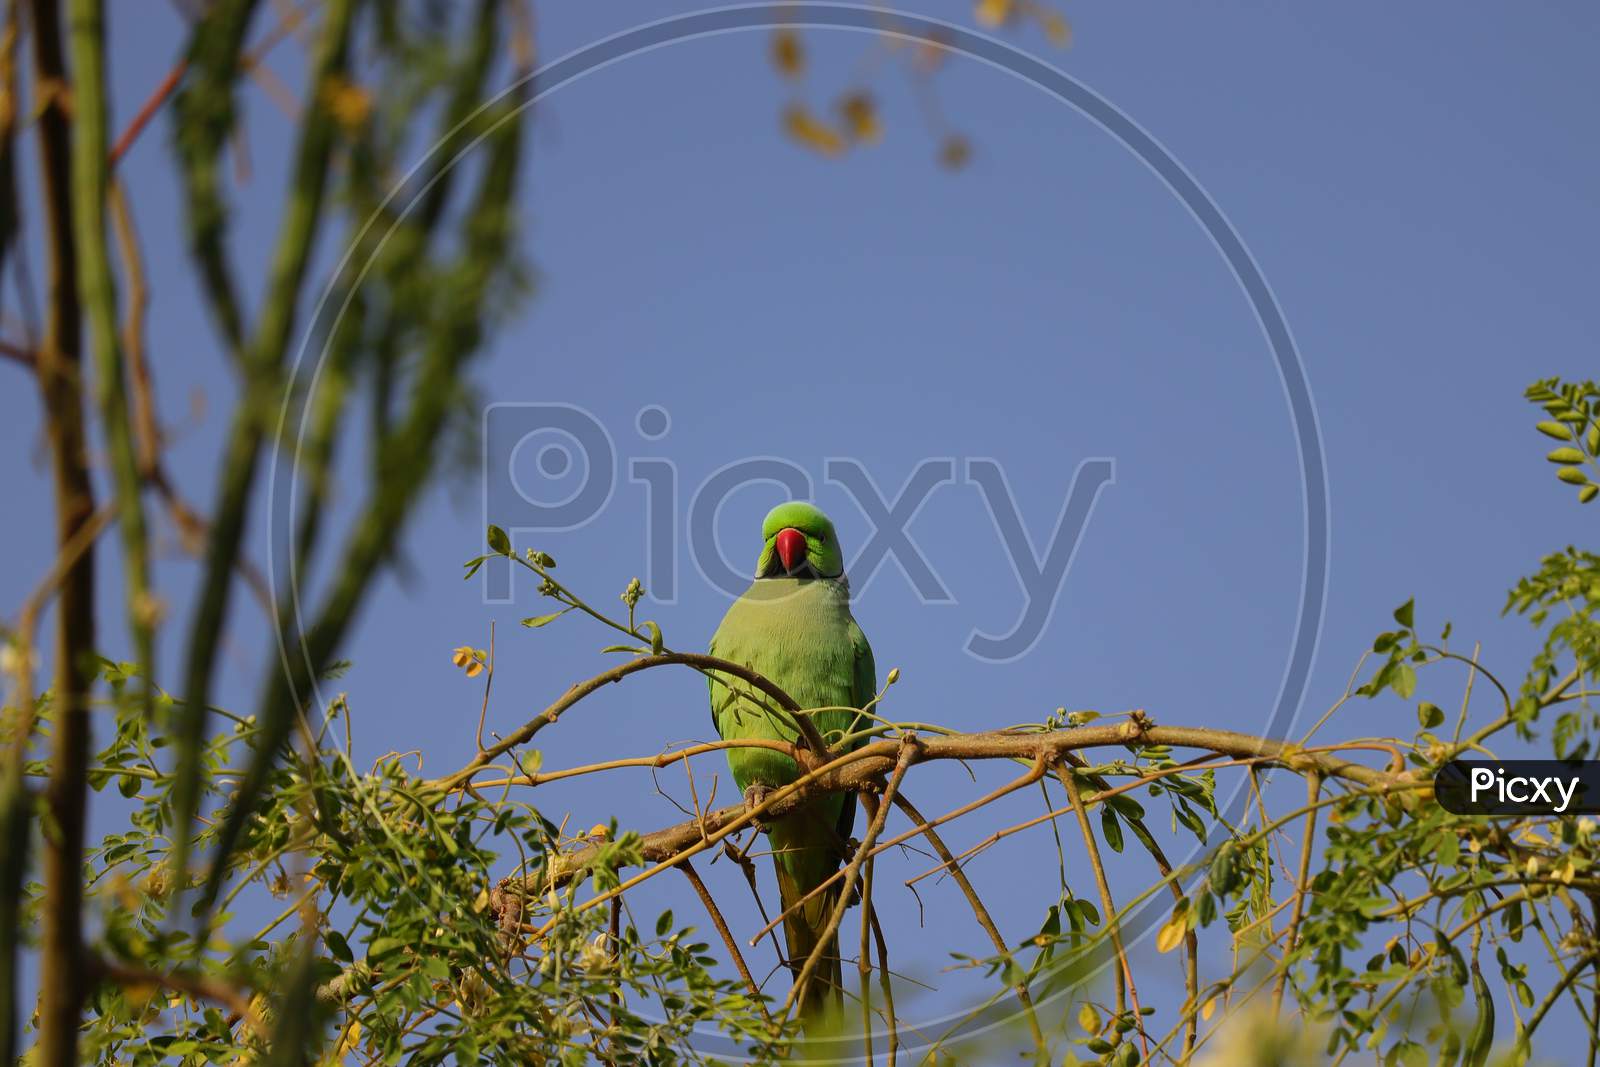 Parrot Sitting On The Tree Branch With Sky Background